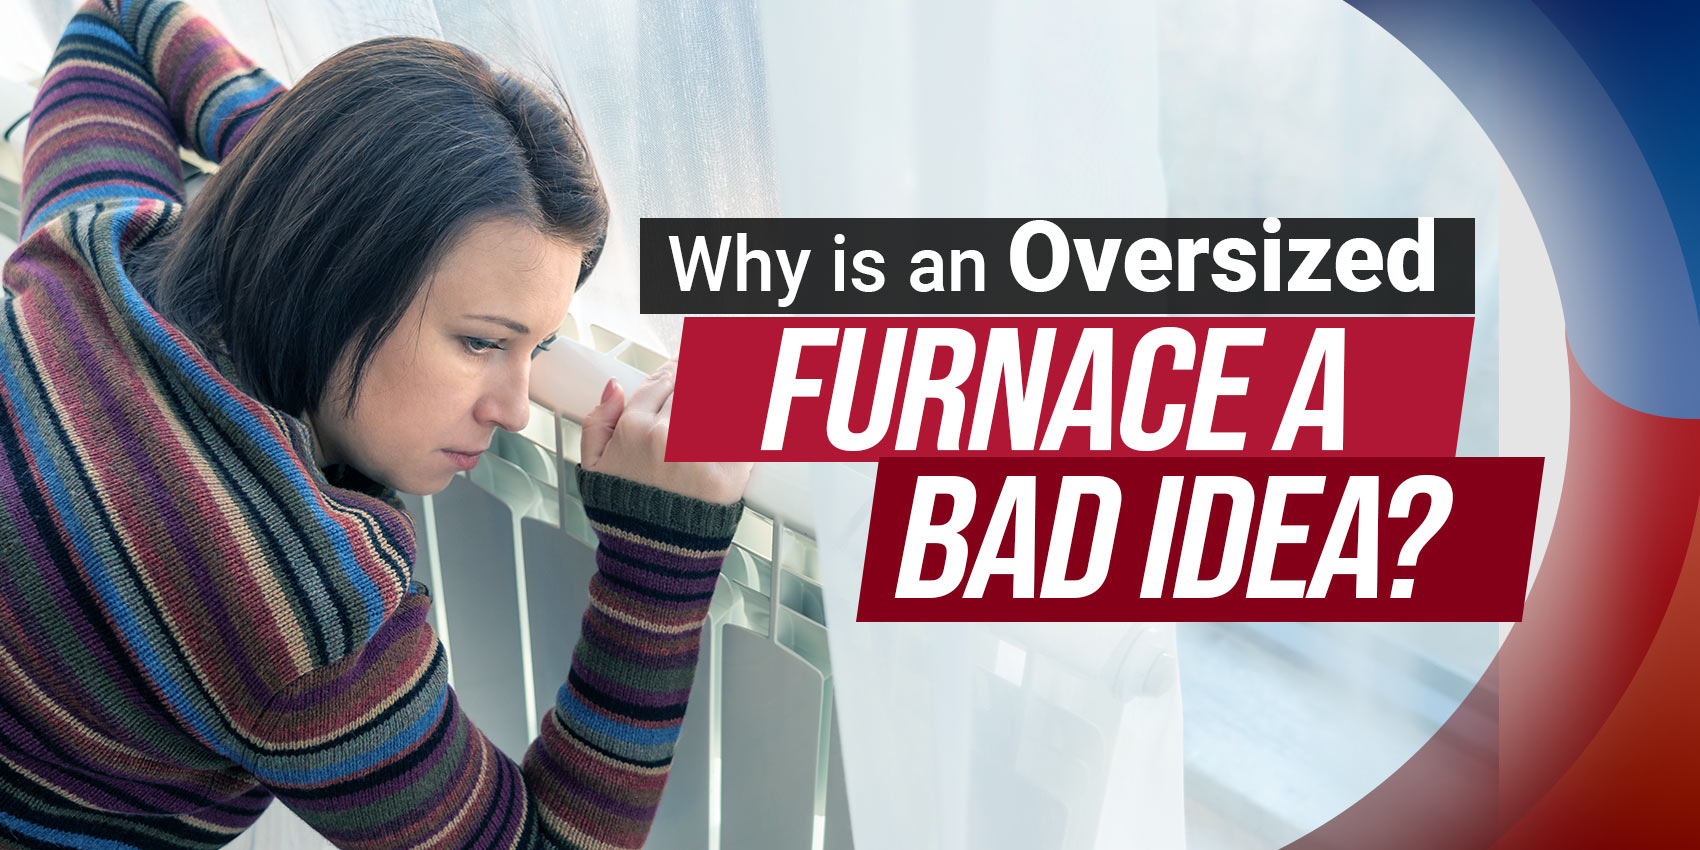 Why is an Oversized Furnace a Bad Idea? 